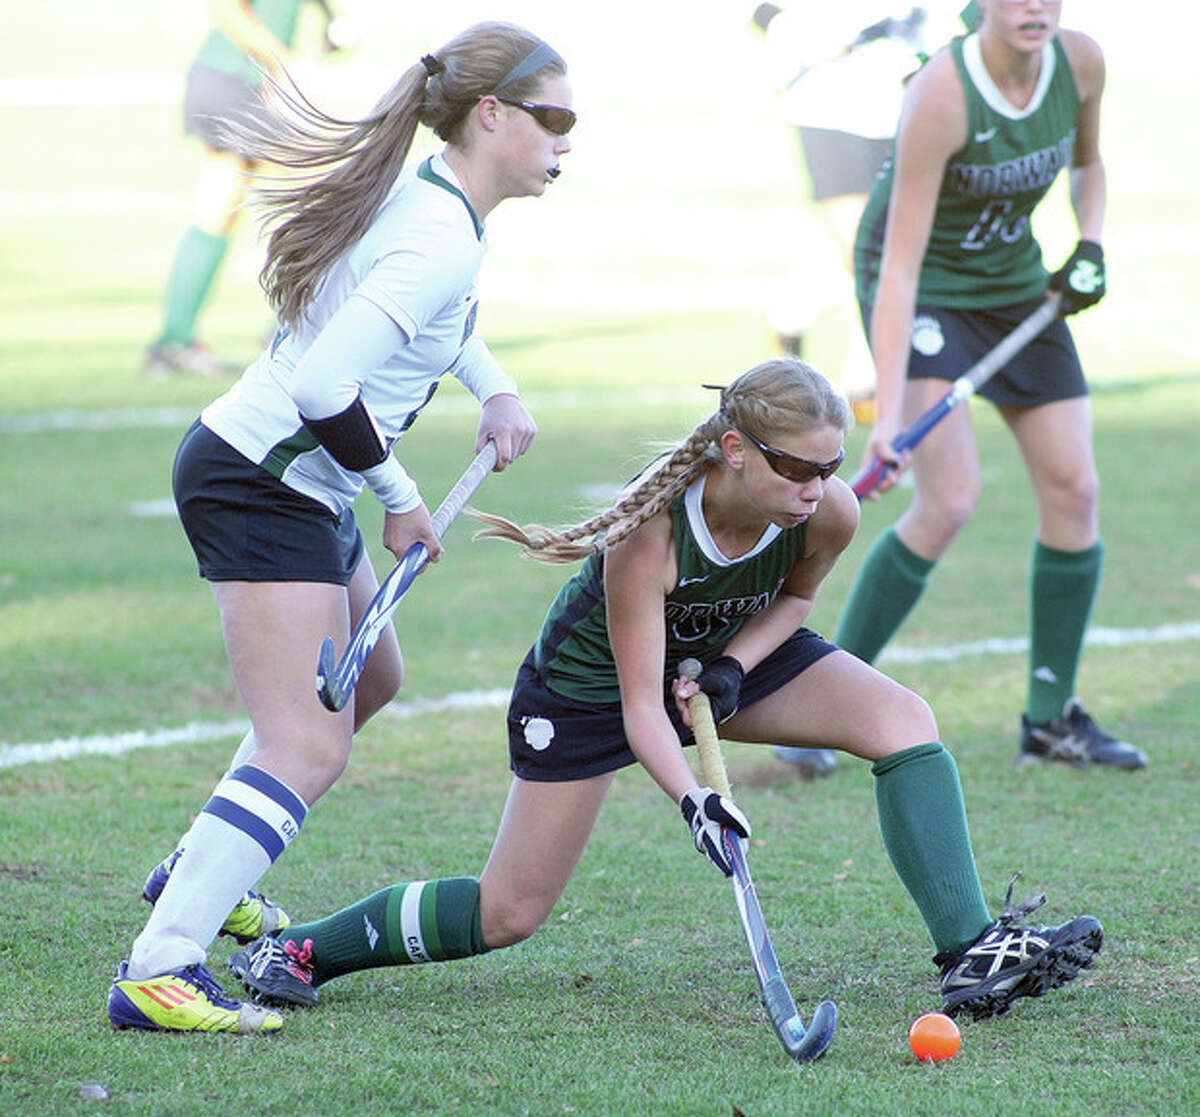 Hour photo/John Nash Norwalk's Greta McConnell, bottom, gets ready to push the ball up the field as New Milford's Corinne Heymach trails during Monday's Class LL prelim game. New Milford won, 1-0, ending the Bears season.